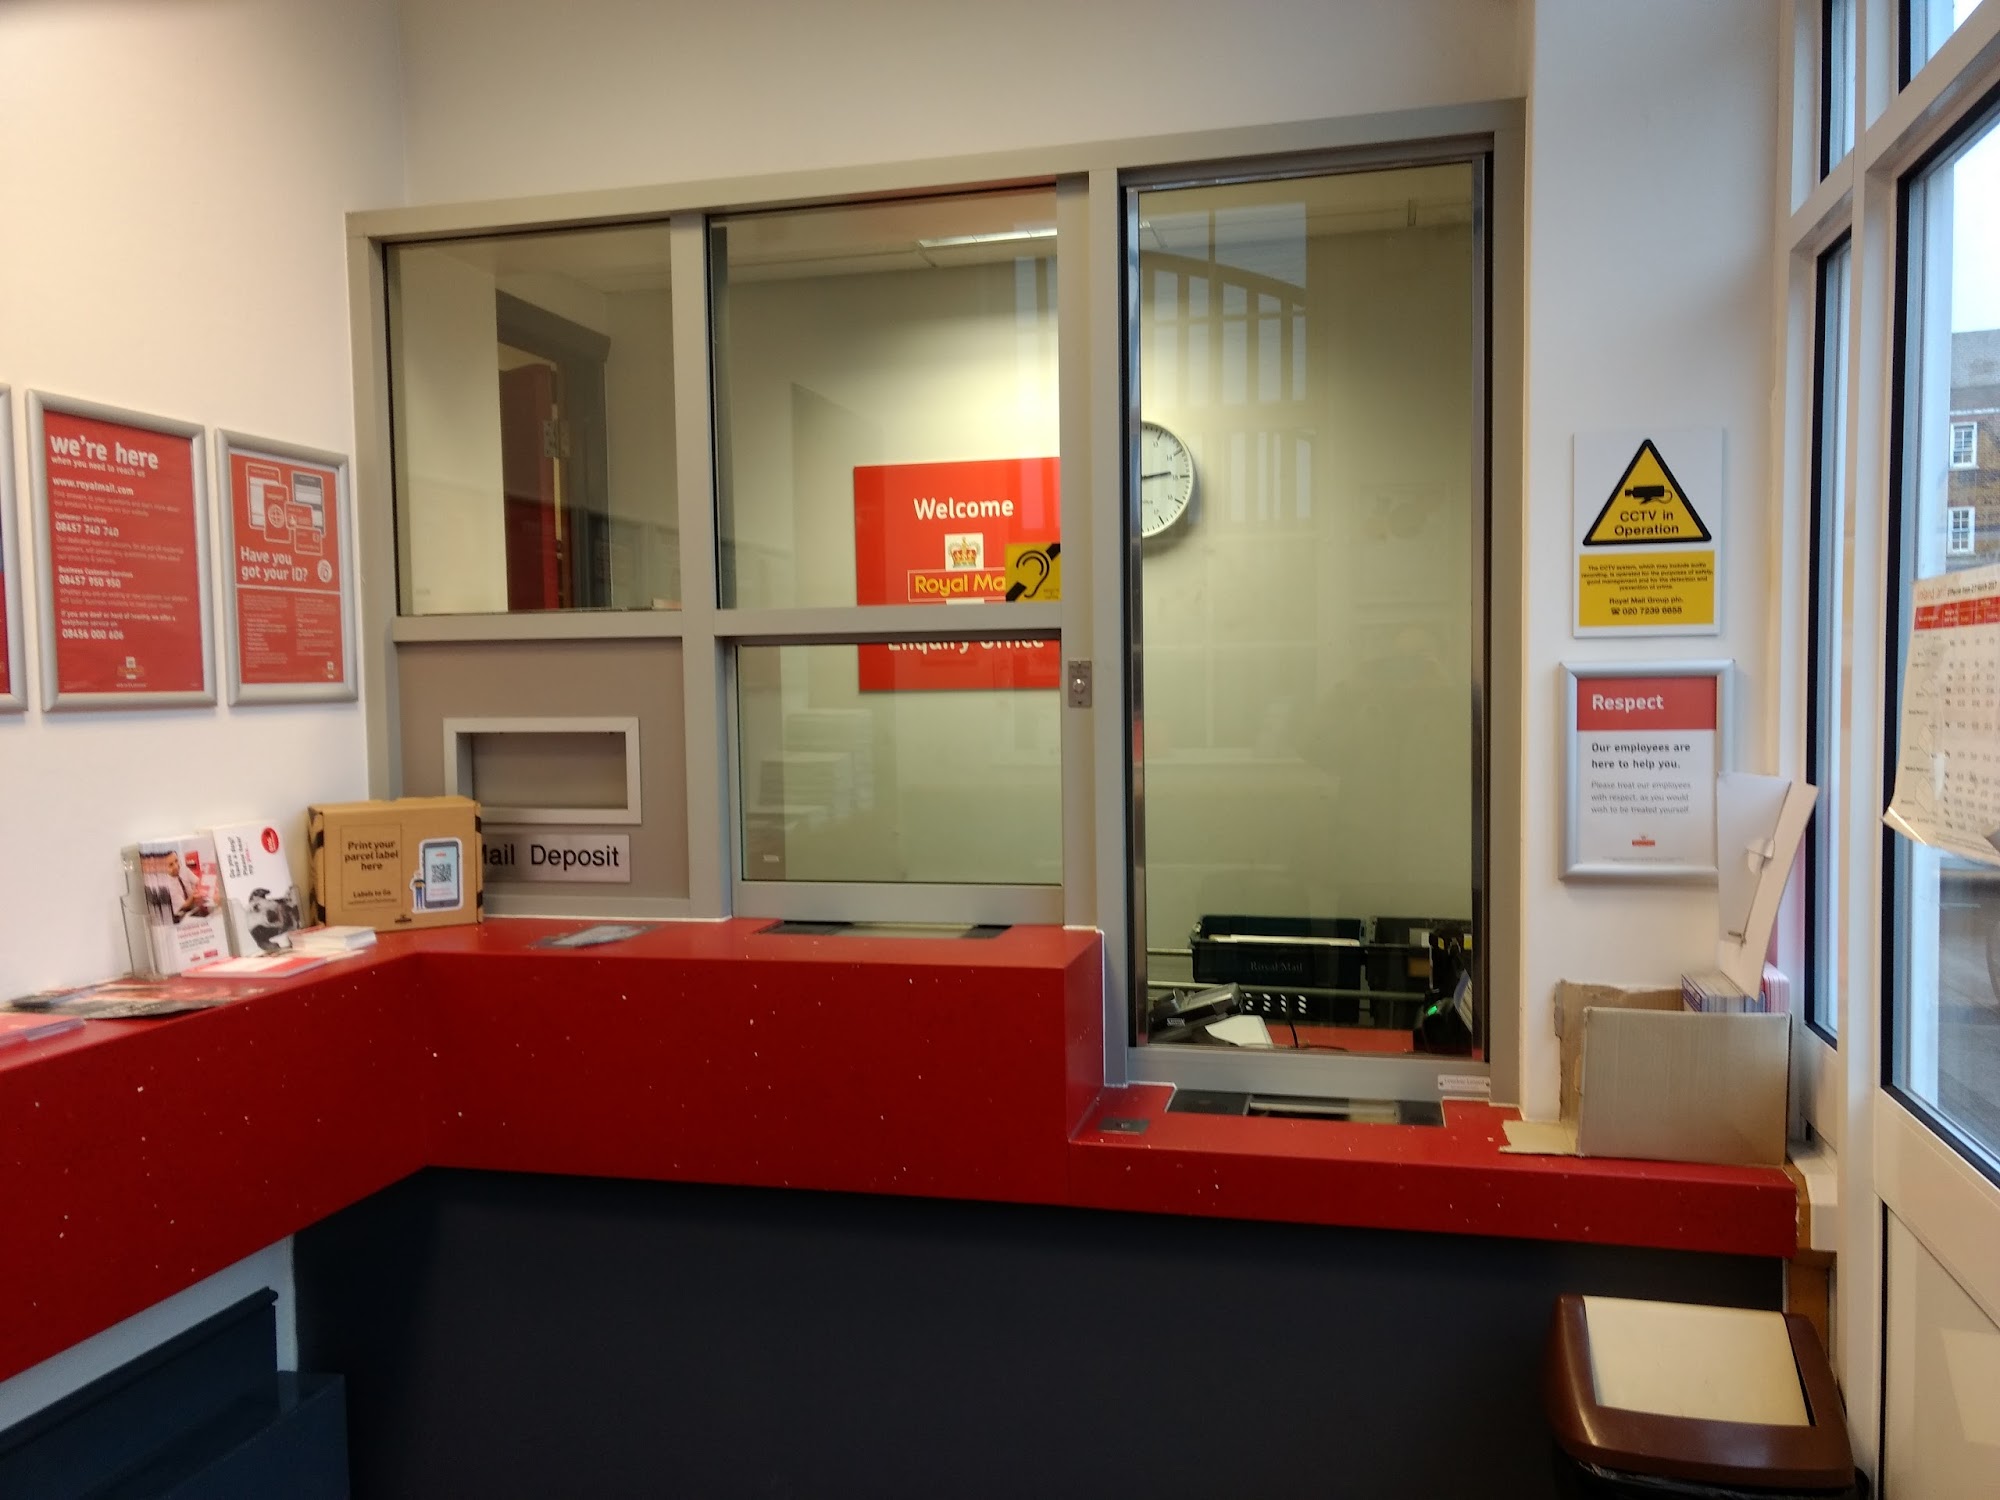 Royal Mail Weybridge Delivery Office,